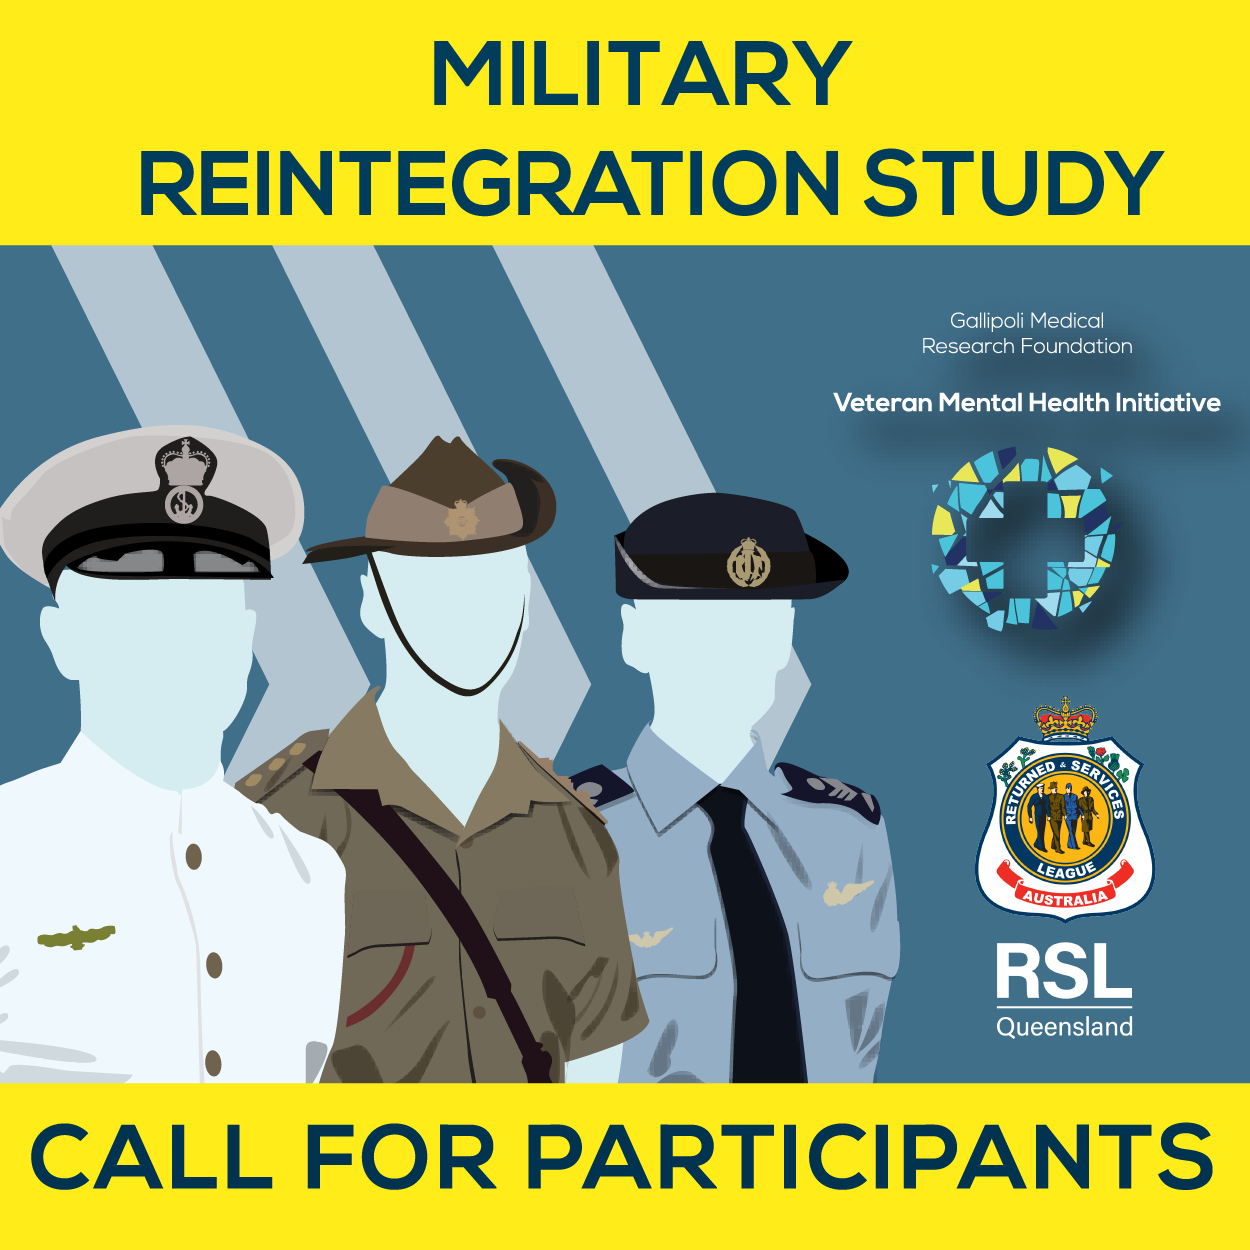 Gallipoli Medical Research military reintegration study poster